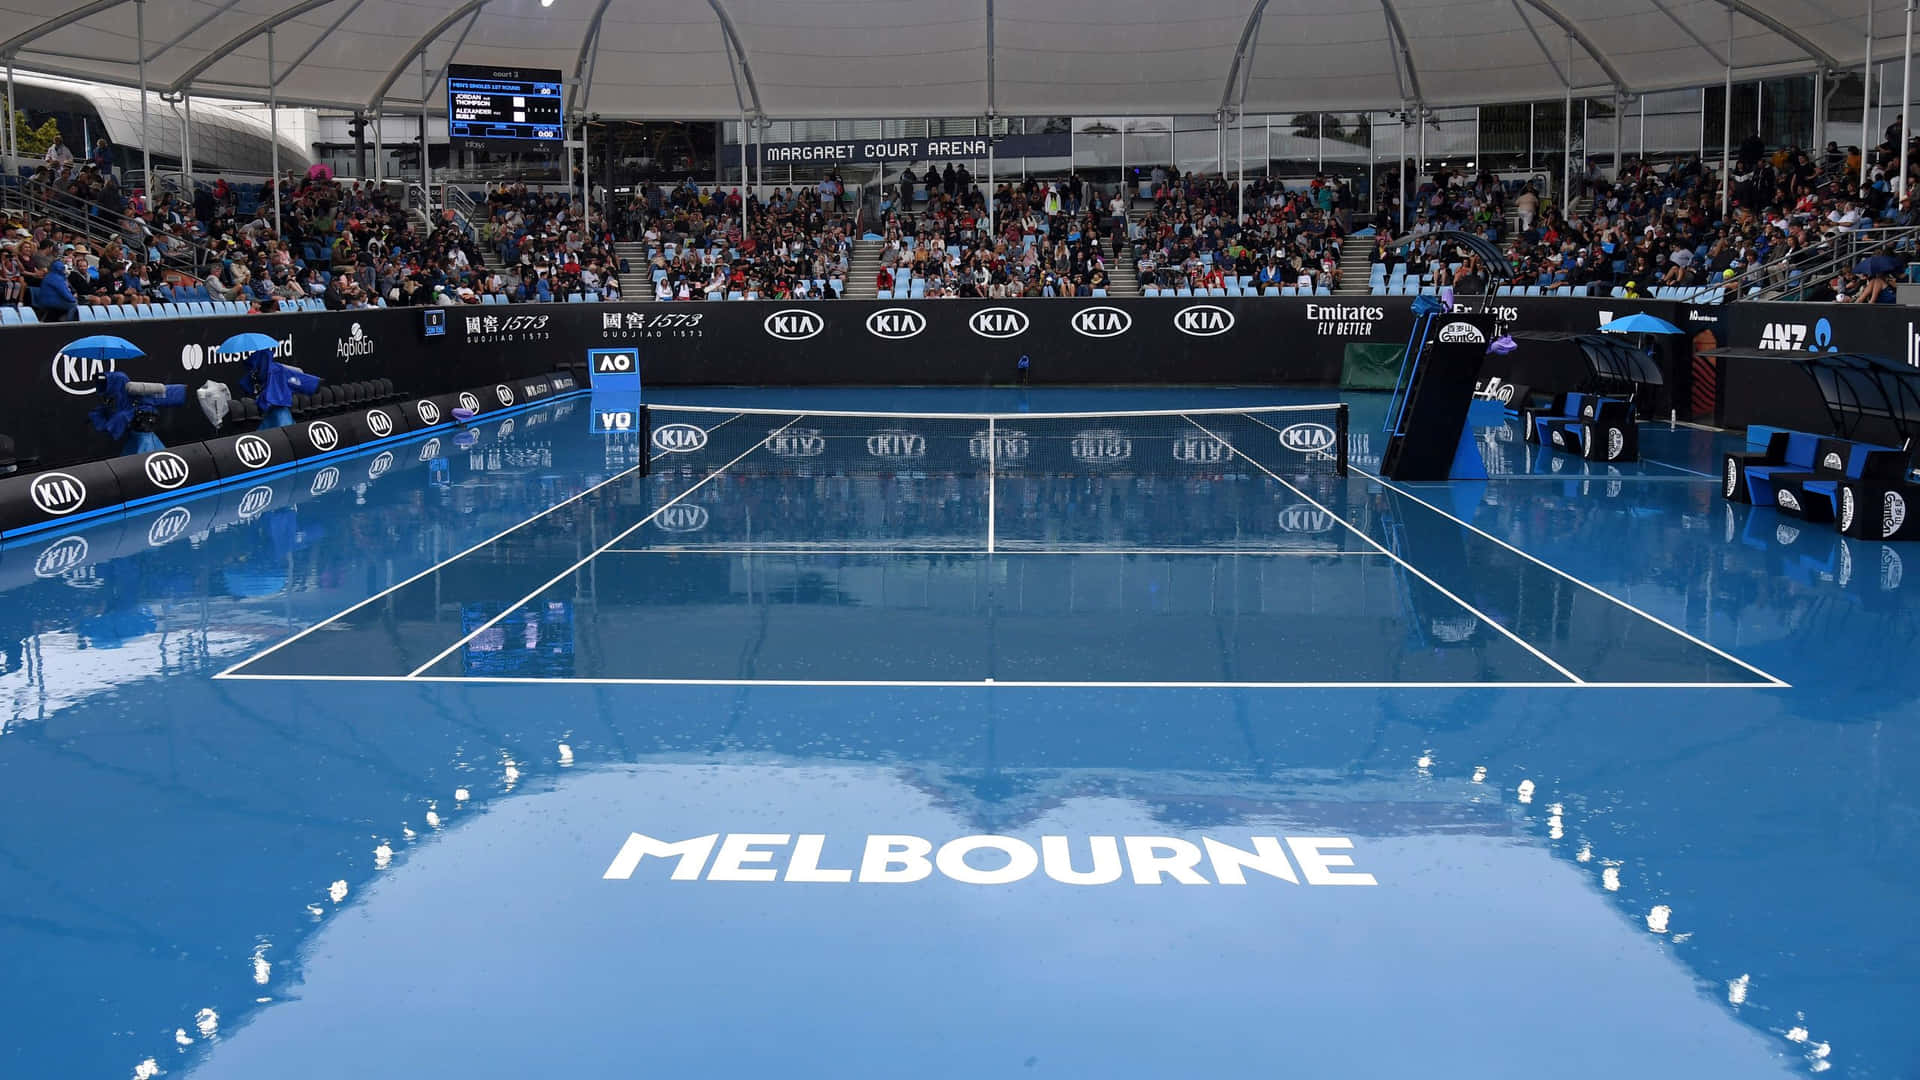 Hundreds of fans cheer on their favorite players during the Australian Open.